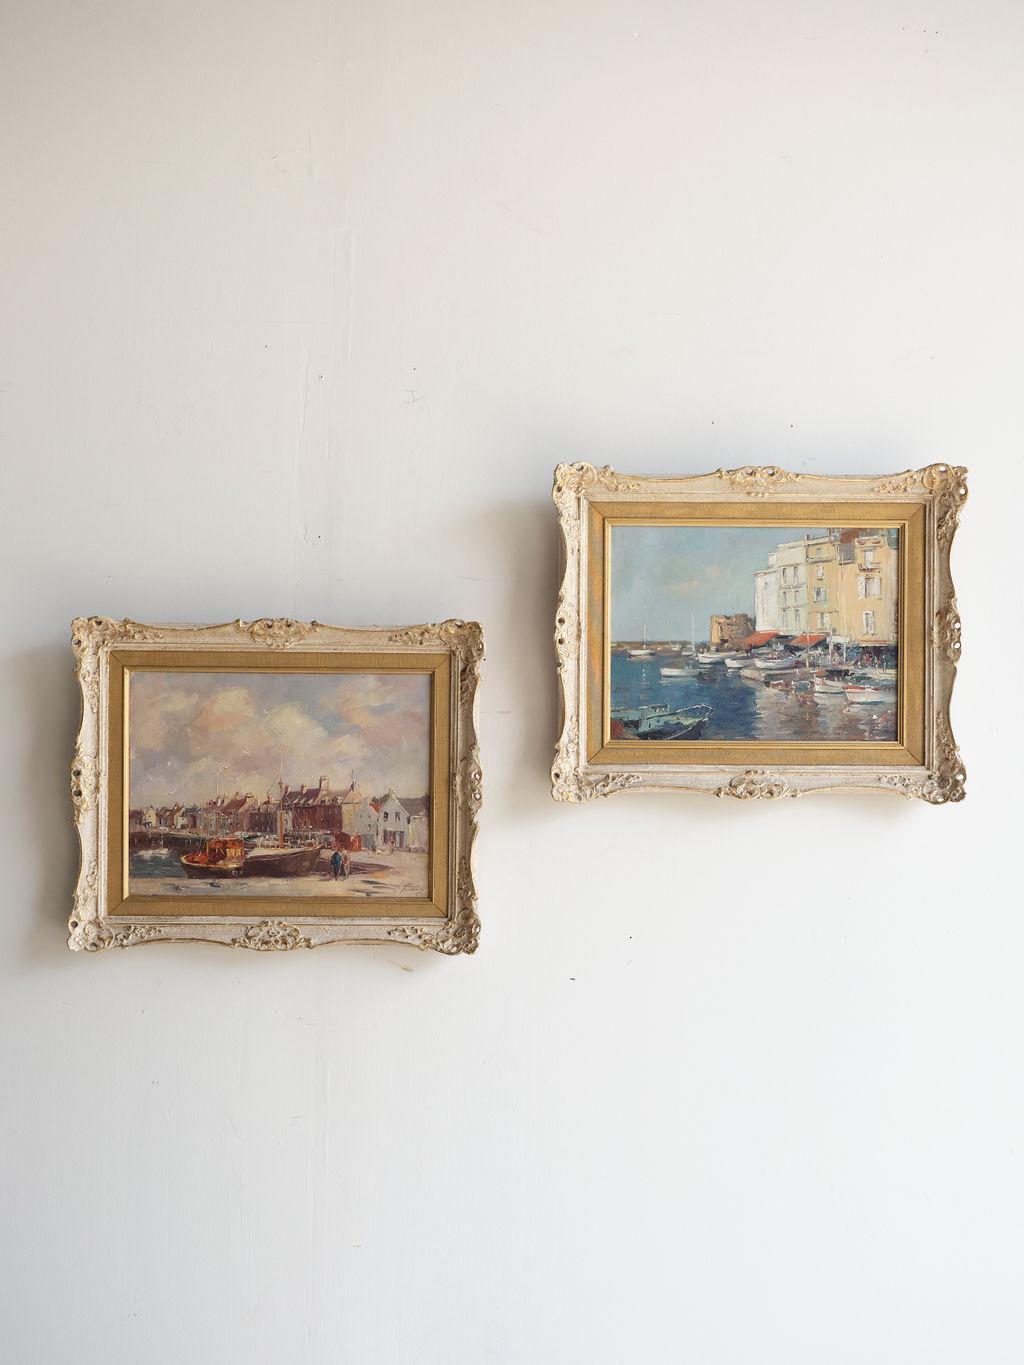 This pair of oil paintings by Phyllis Morgans features the harbors of St. Tropez and Anstruther in the mid 20th century. The dominant colors are blues and tans. The paintings are in their original frames which are a lovely gold and cream color with